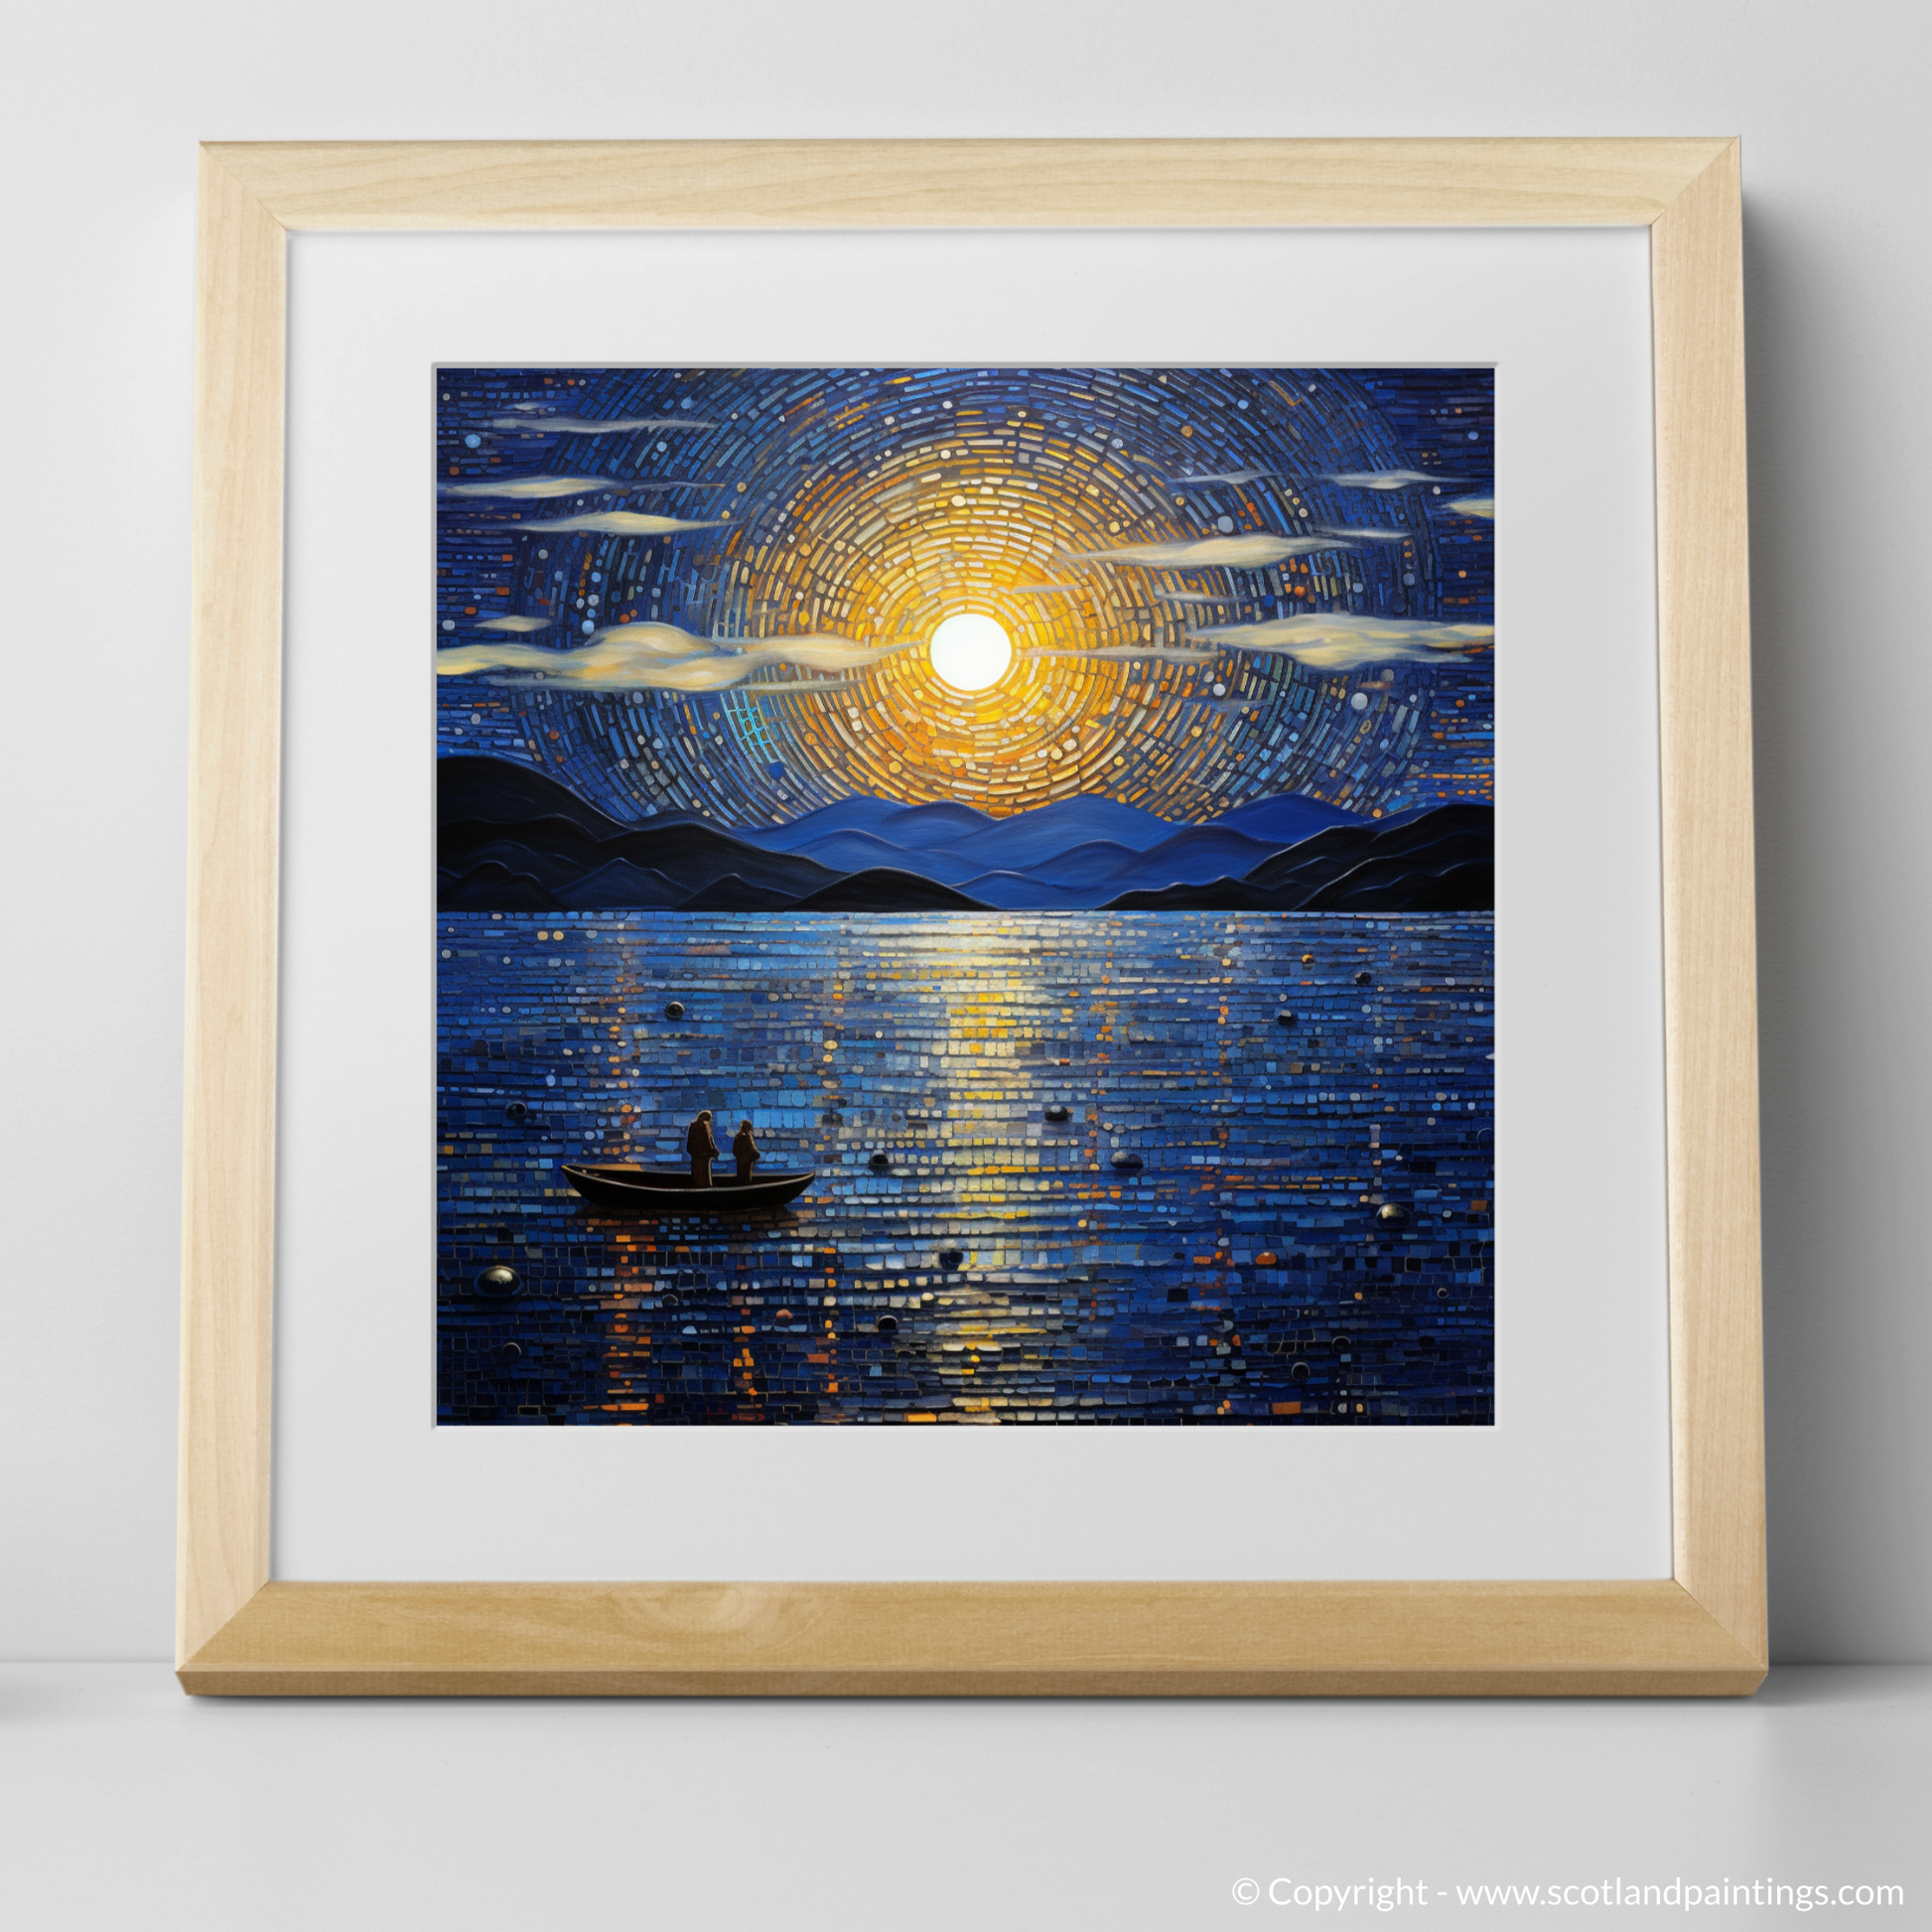 Art Print of Twilight reflections on Loch Lomond with a natural frame